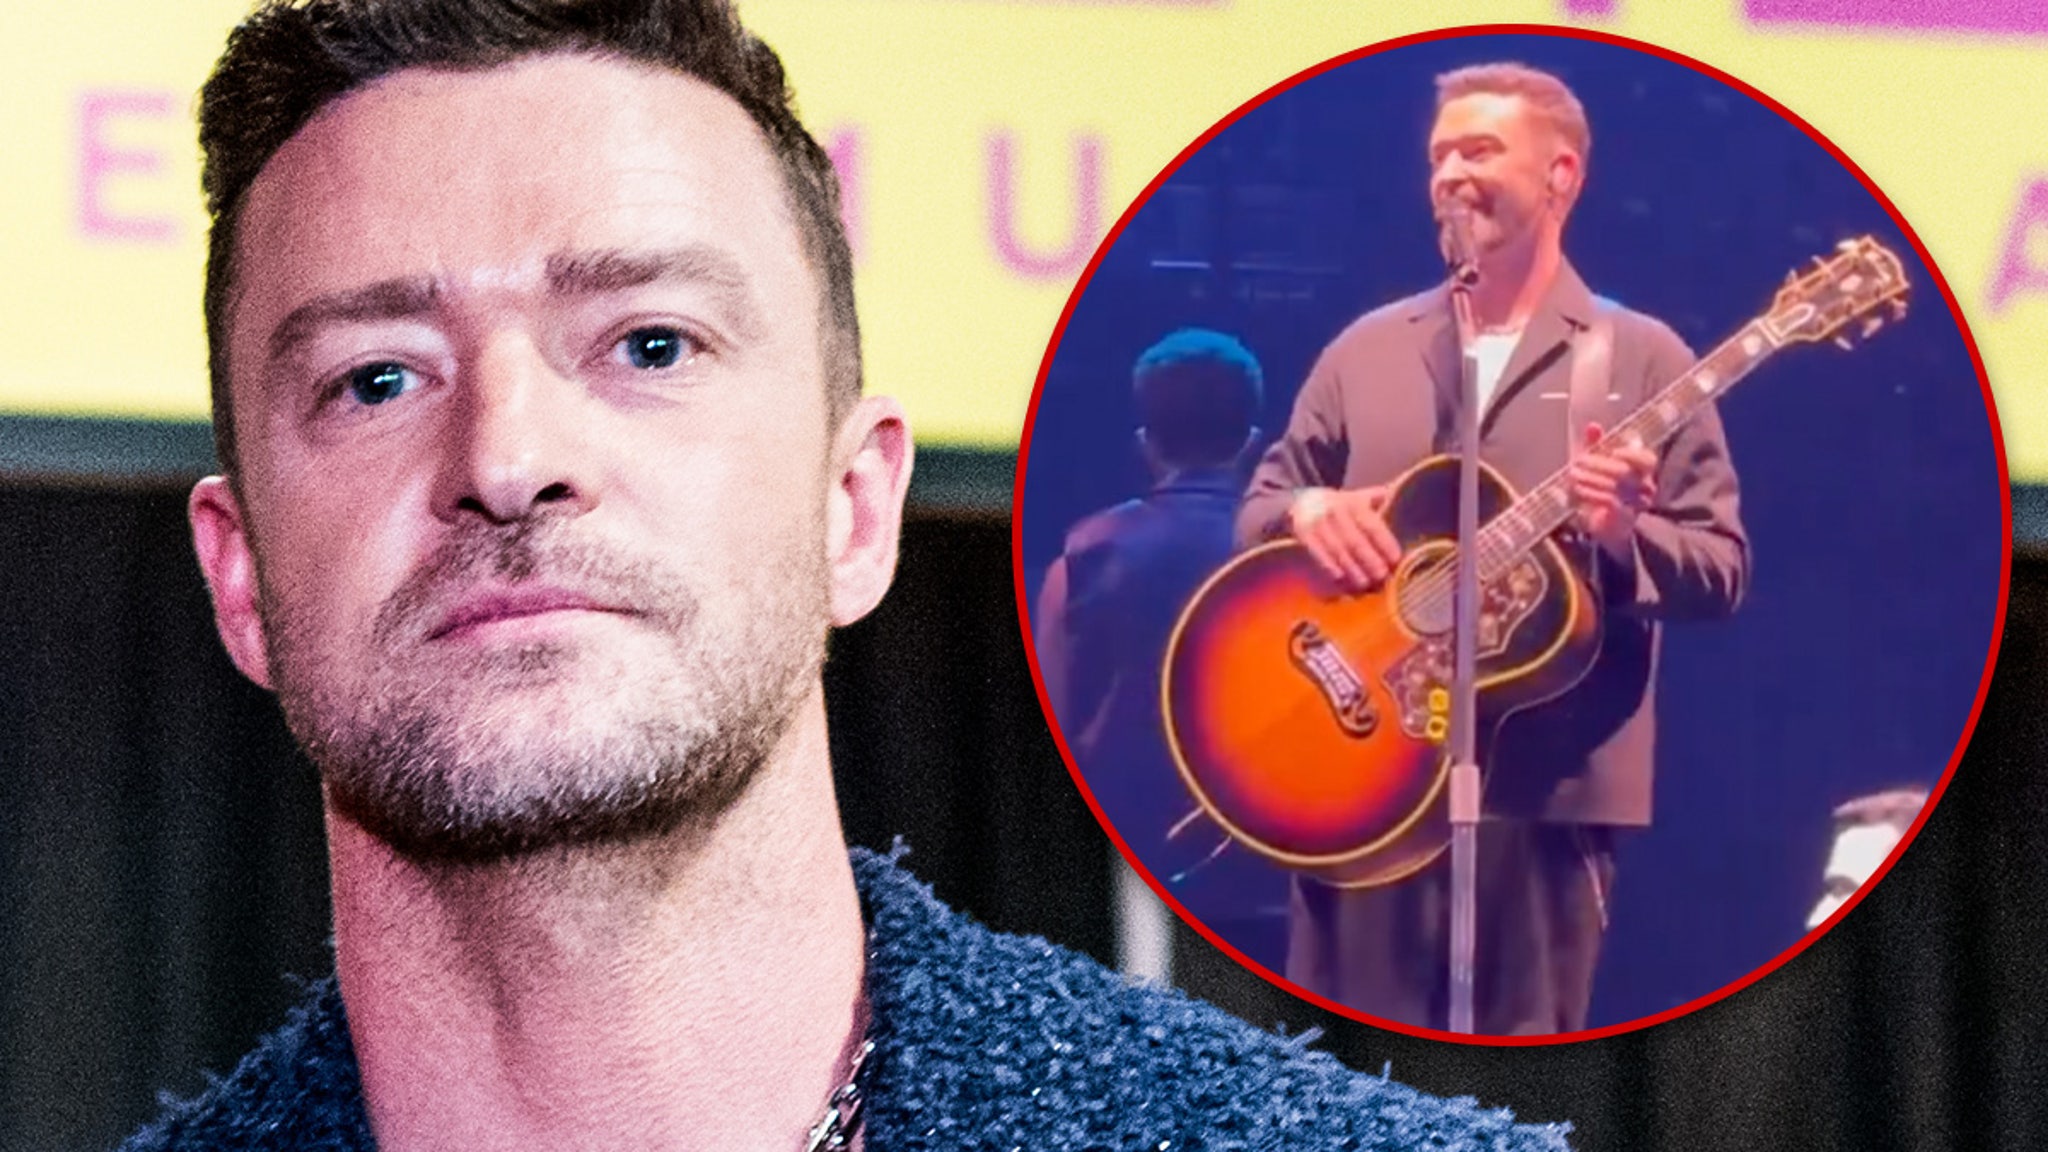 Justin Timberlake Makes First Public Comment On DWI Arrest At Chicago Concert